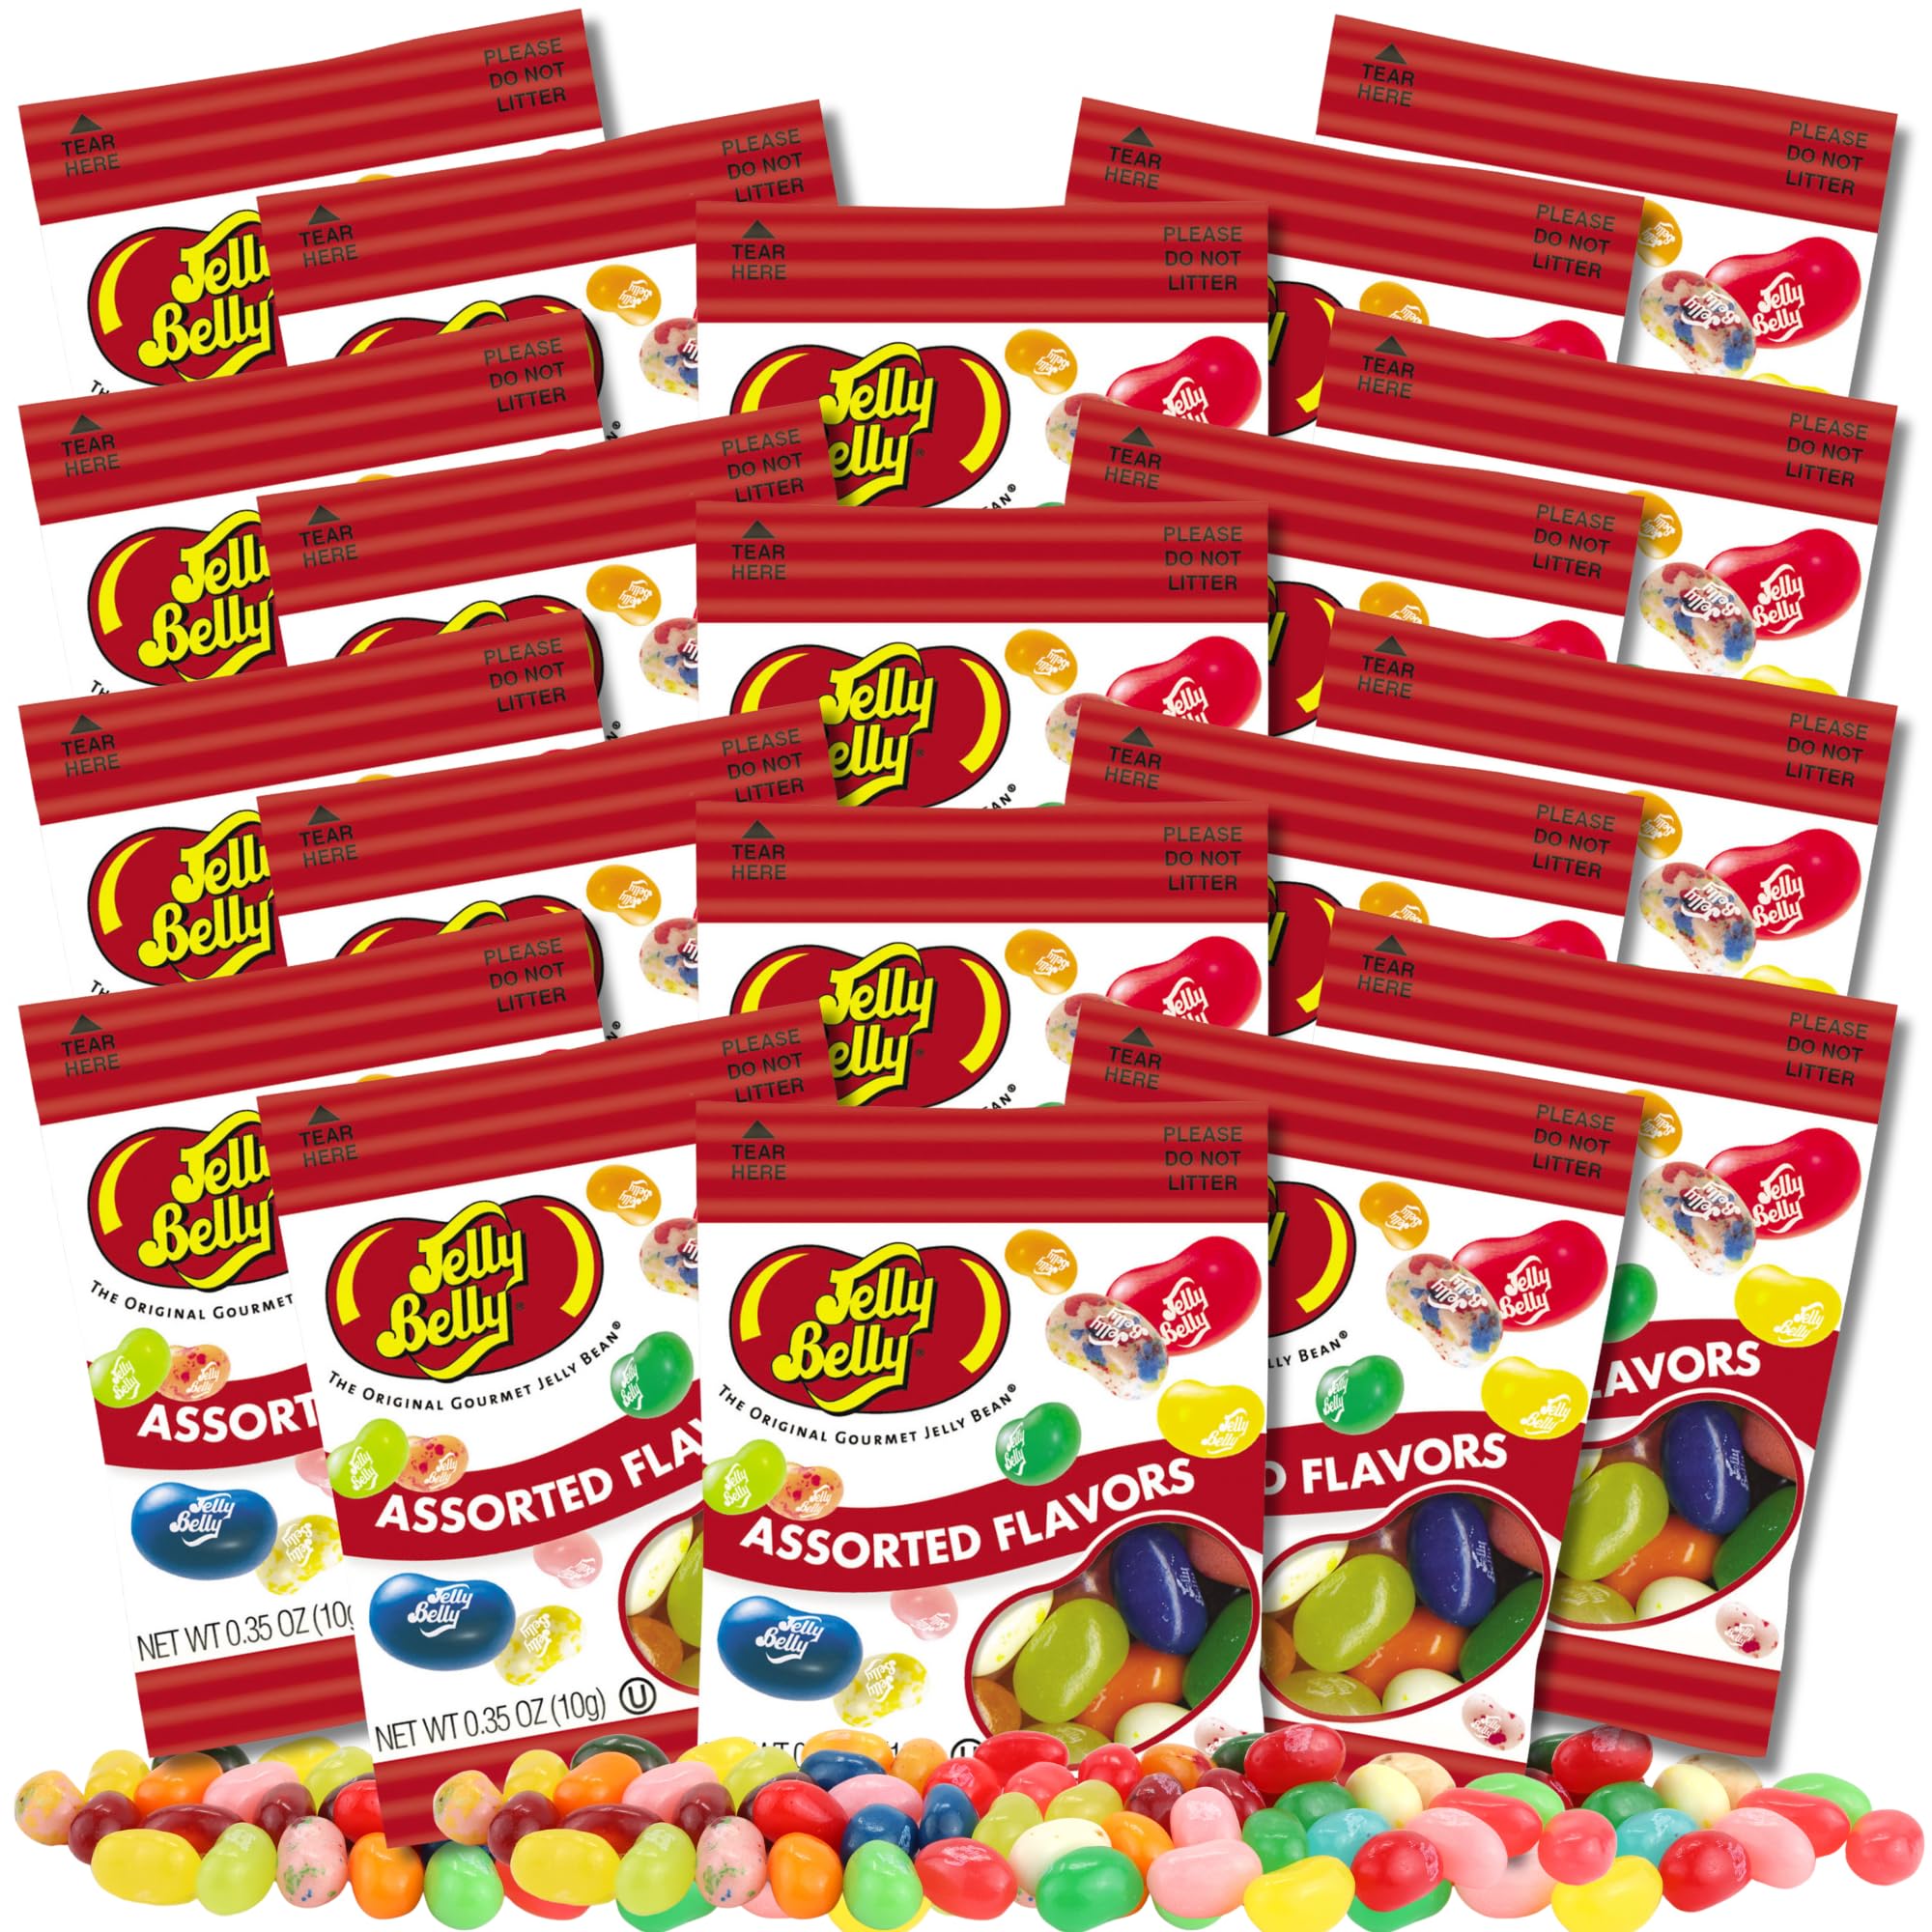 20-Flavor Jelly Belly Jelly Beans